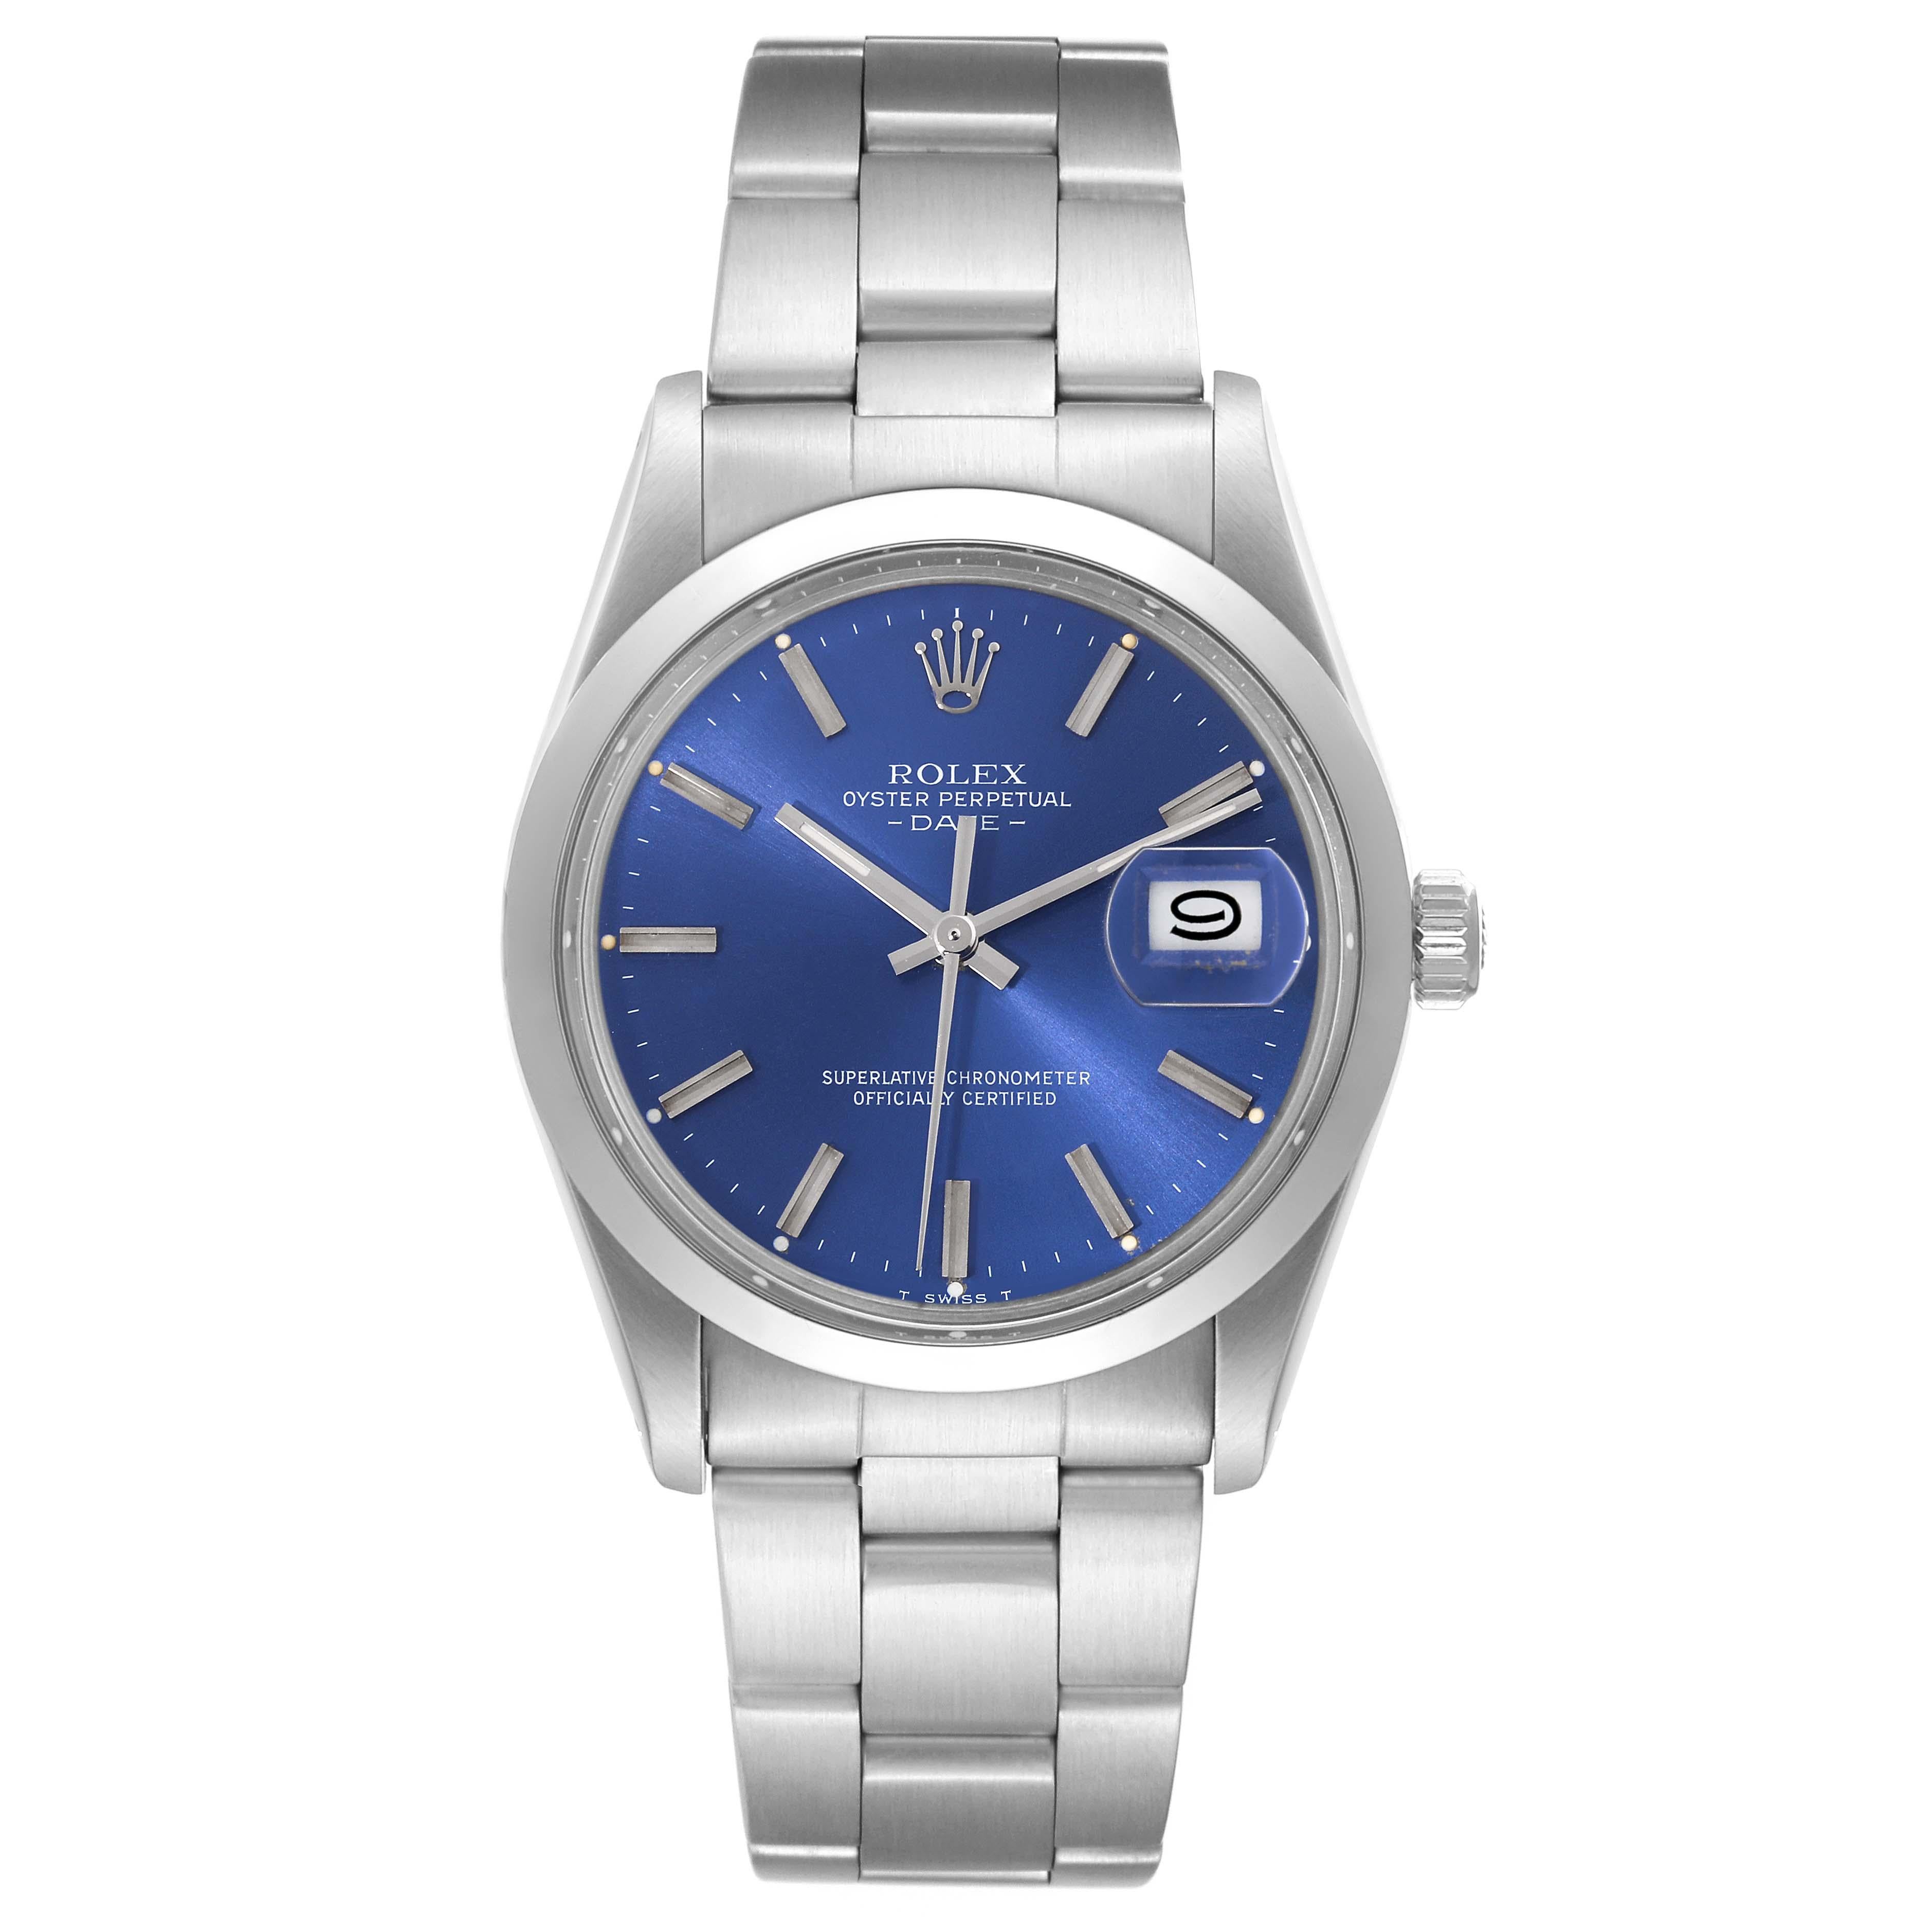 Rolex Date Stainless Steel Blue Dial Vintage Mens Watch 15000. Officially certified chronometer automatic self-winding movement. Stainless steel oyster case 34.0 mm in diameter. Rolex logo on the crown. Stainless steel smooth bezel. Acrylic crystal